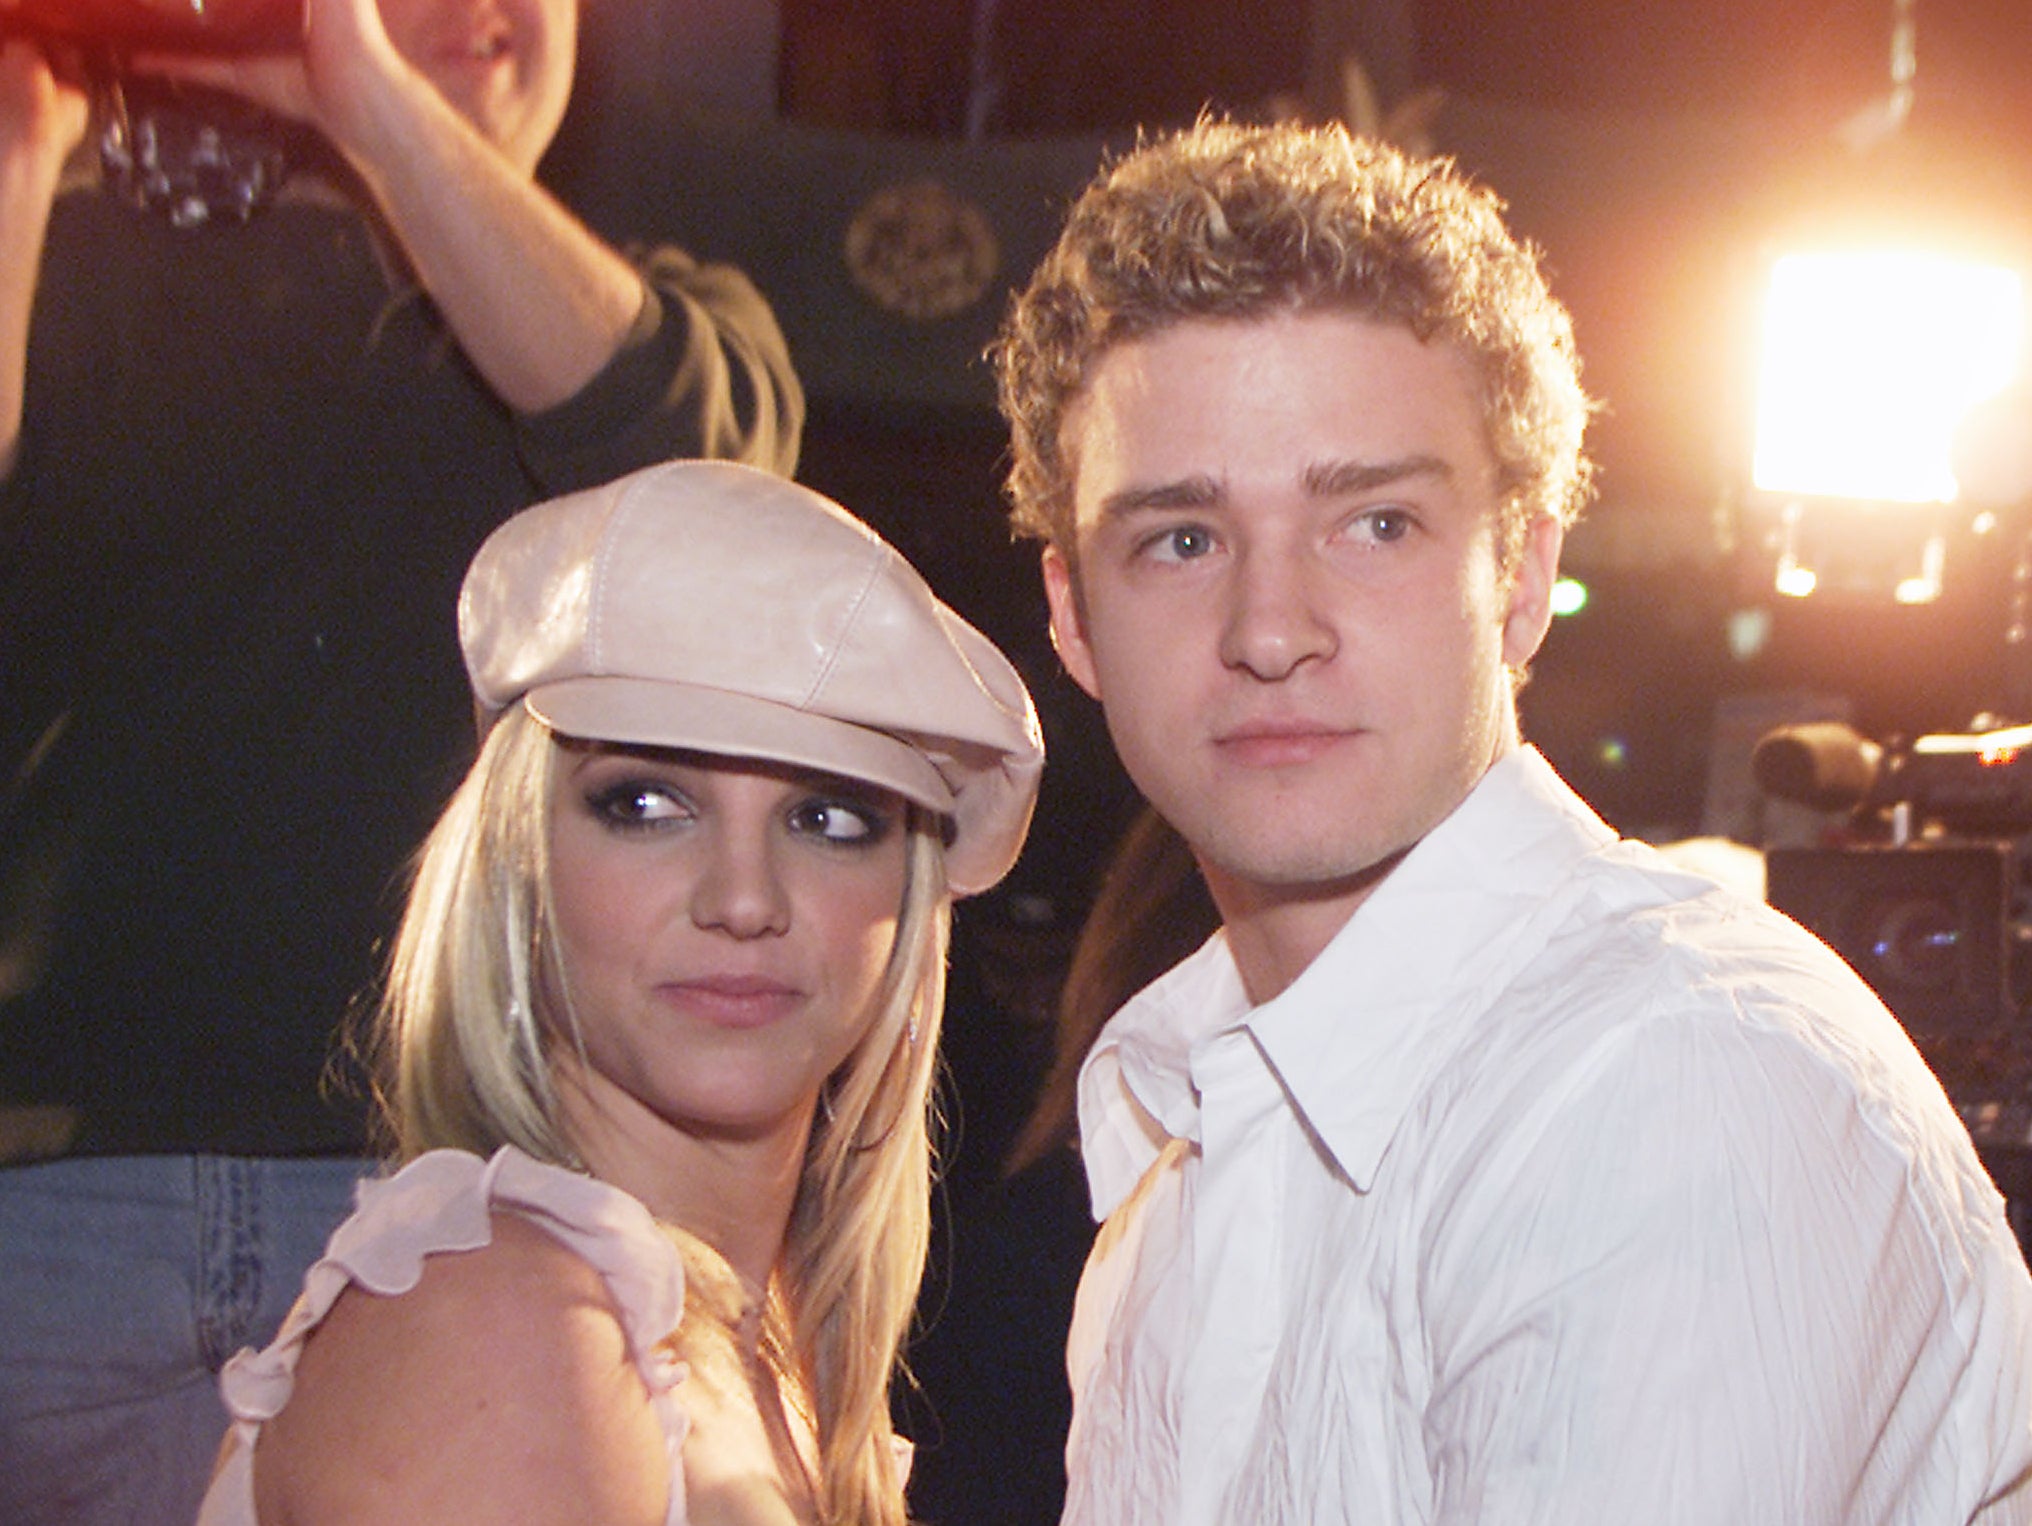 Britney Spears and Justin Timberlake in 2002